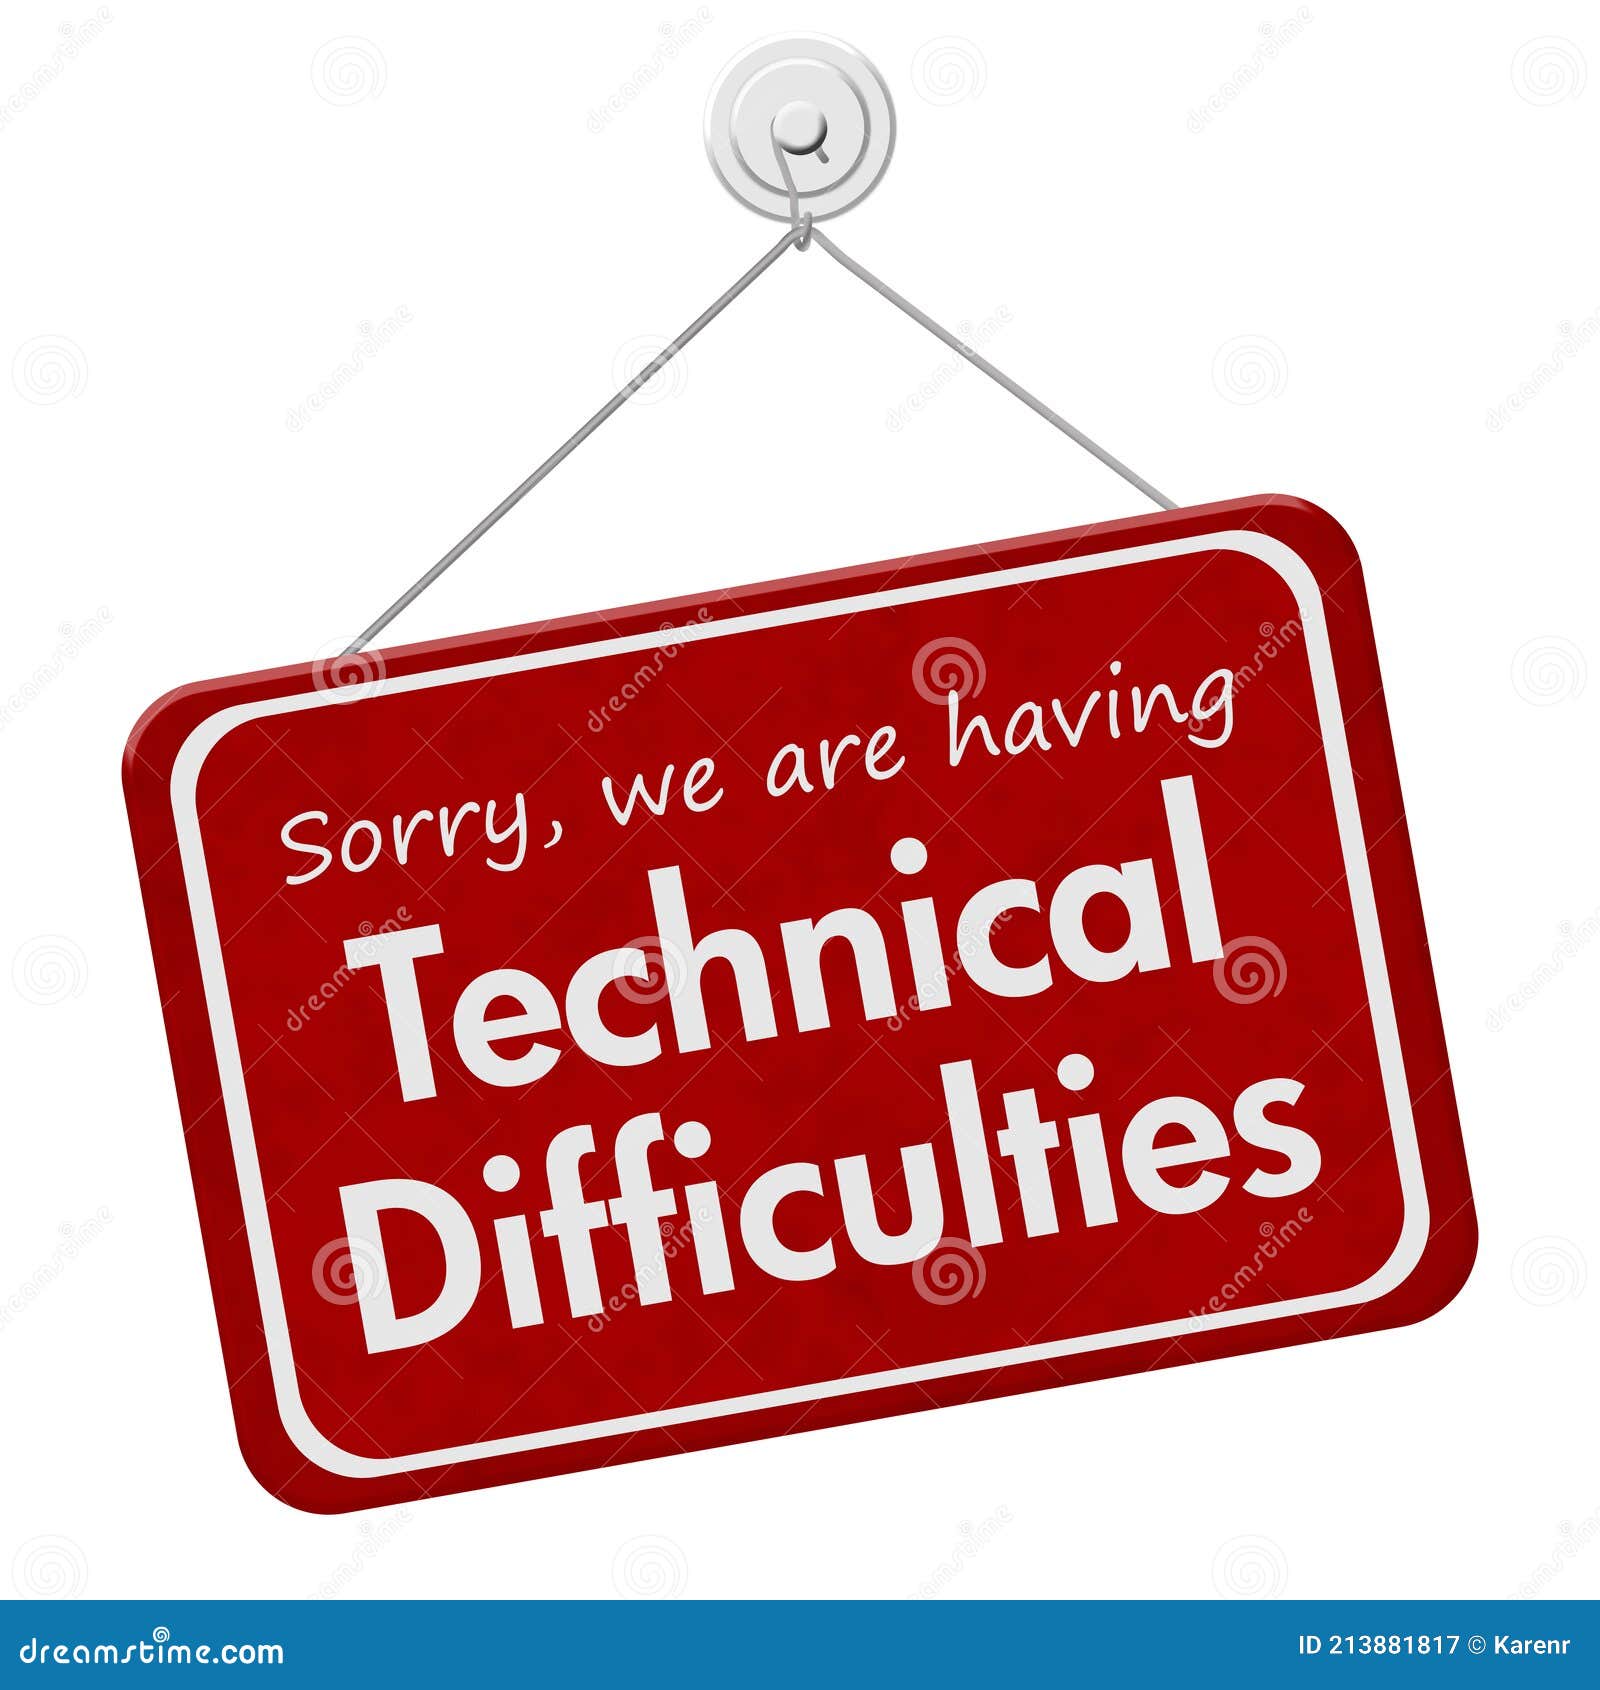 technical difficulties message on red sign